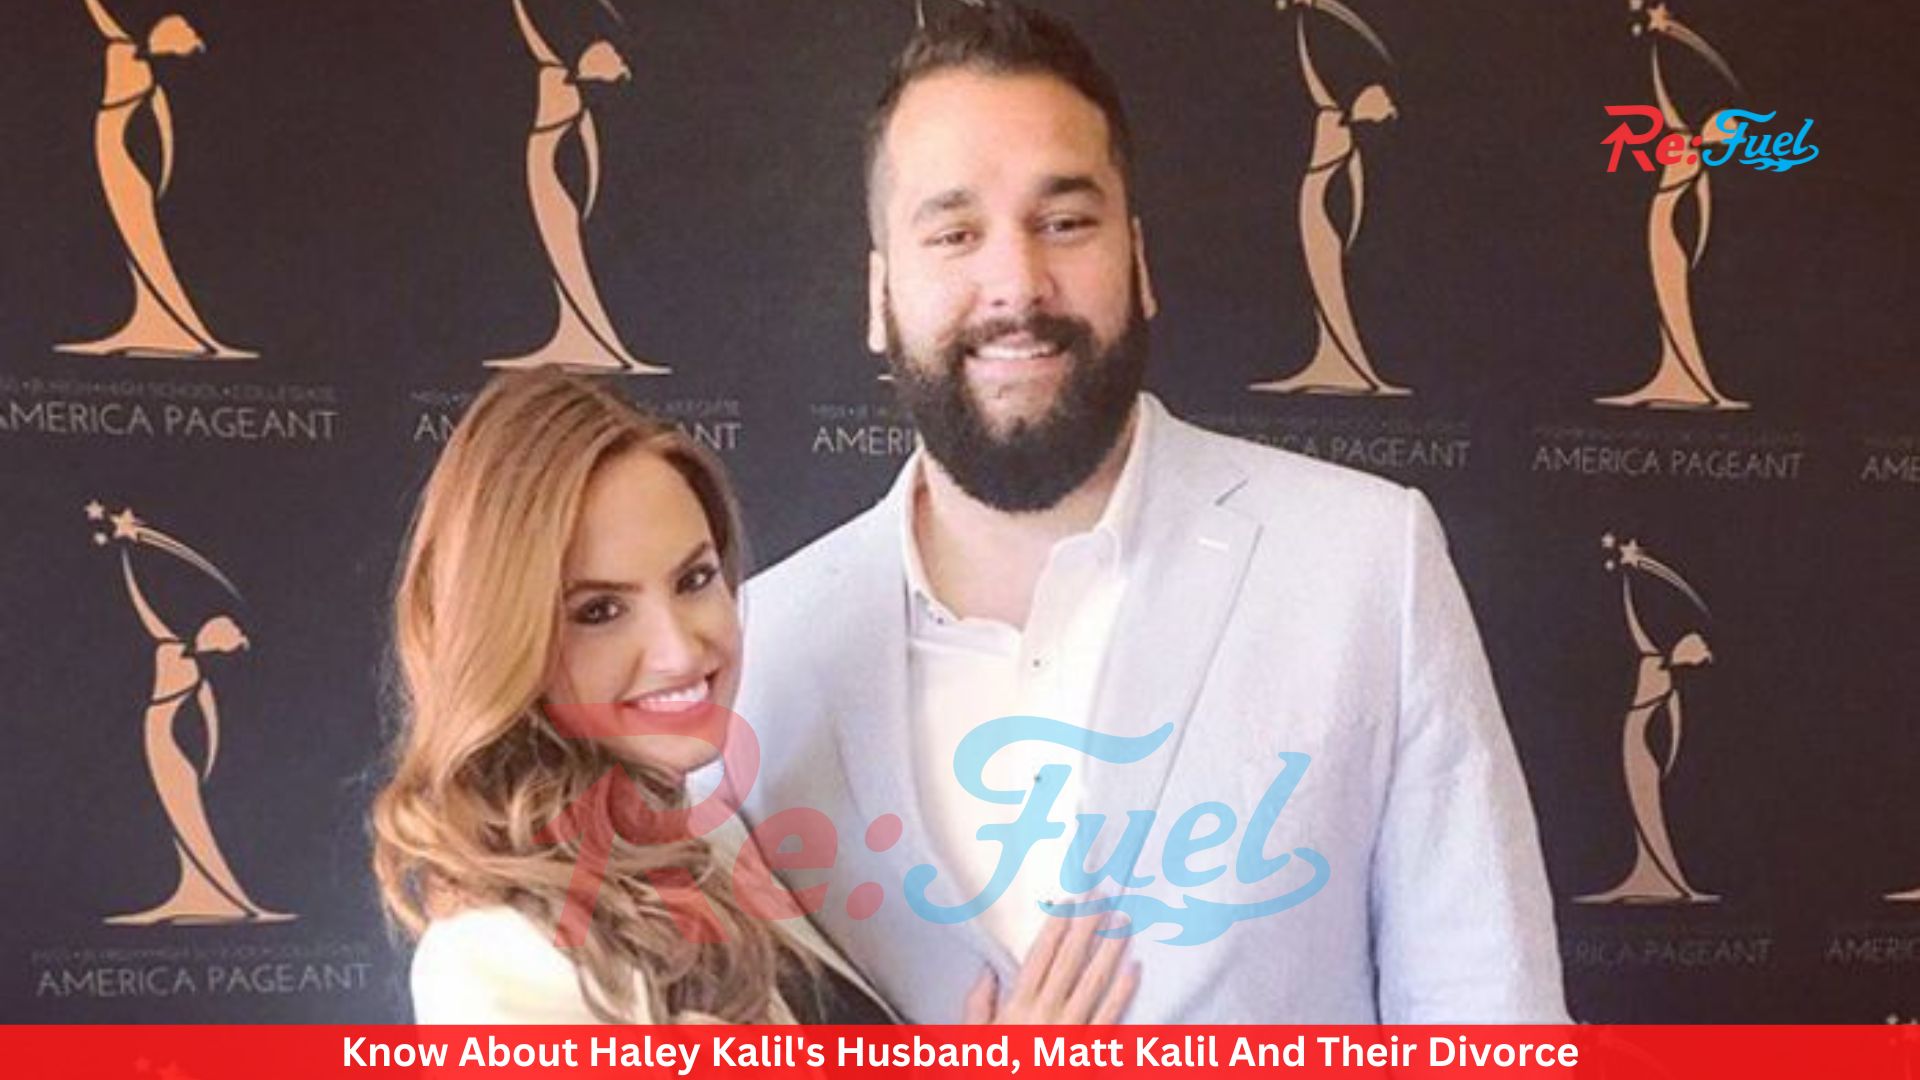 Know About Haley Kalil's Husband, Matt Kalil And Their Divorce